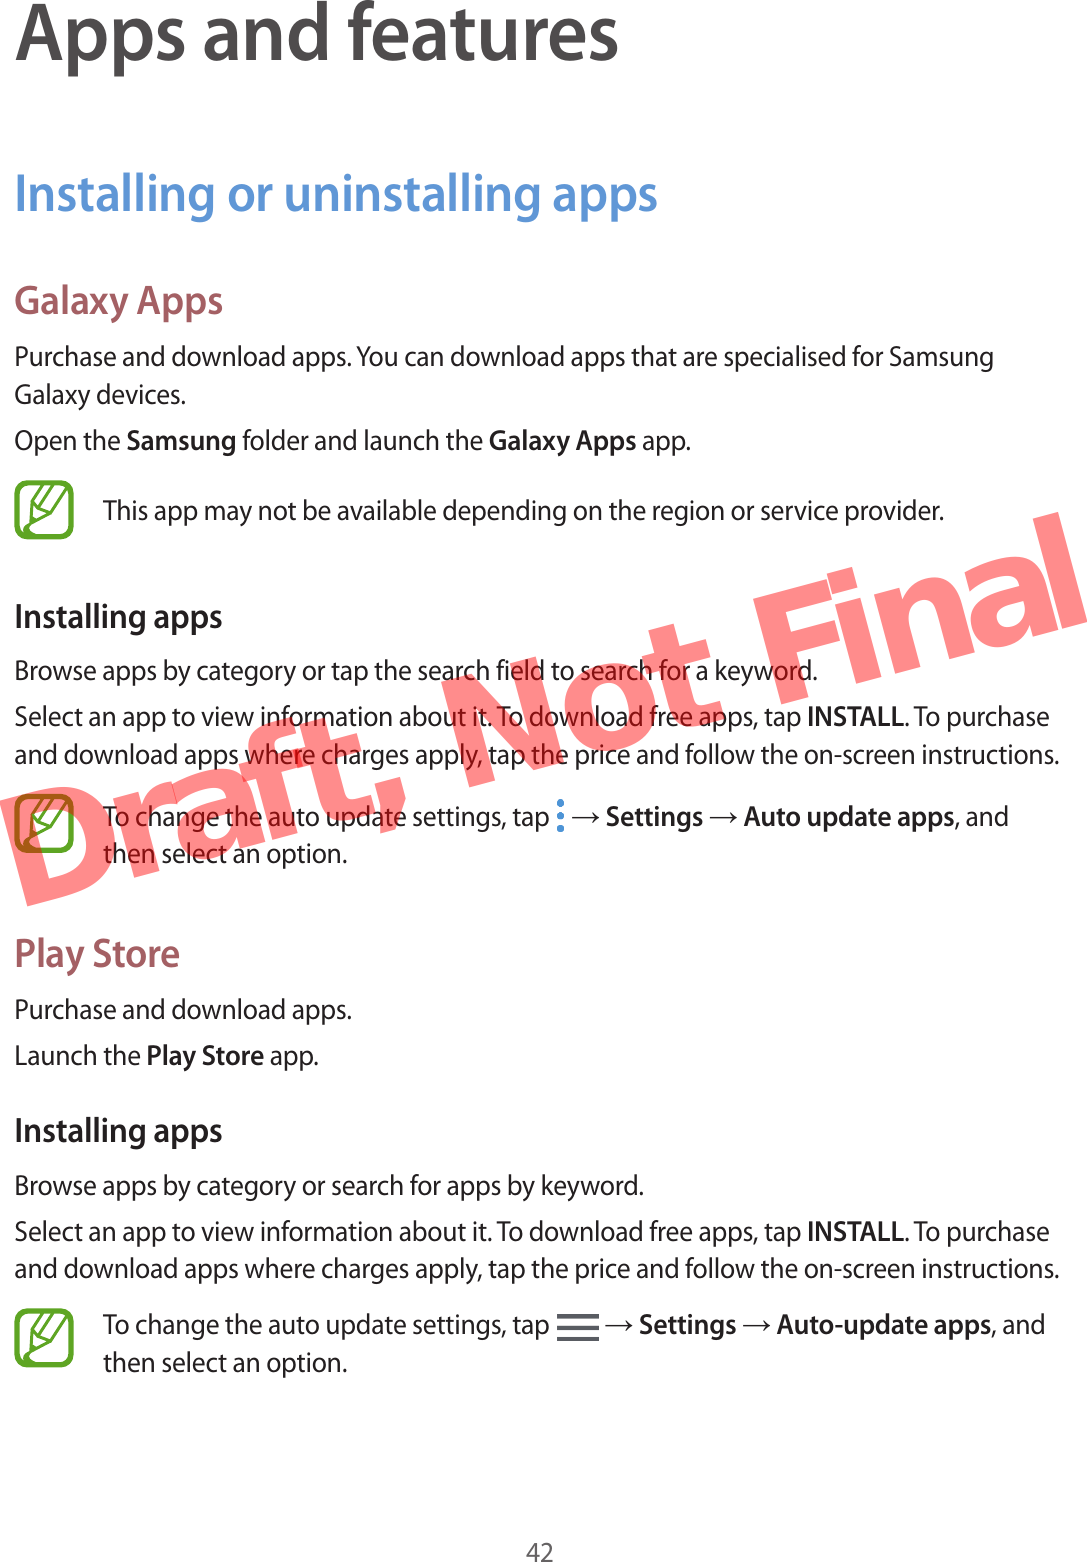 42Apps and featuresInstalling or uninstalling appsGalaxy AppsPurchase and download apps. You can download apps that are specialised for Samsung Galaxy devices.Open the Samsung folder and launch the Galaxy Apps app.This app may not be available depending on the region or service provider.Installing appsBrowse apps by category or tap the search field to search for a keyword.Select an app to view information about it. To download free apps, tap INSTALL. To purchase and download apps where charges apply, tap the price and follow the on-screen instructions.To change the auto update settings, tap   → Settings → Auto update apps, and then select an option.Play StorePurchase and download apps.Launch the Play Store app.Installing appsBrowse apps by category or search for apps by keyword.Select an app to view information about it. To download free apps, tap INSTALL. To purchase and download apps where charges apply, tap the price and follow the on-screen instructions.To change the auto update settings, tap   → Settings → Auto-update apps, and then select an option.Draft,  Not  Final